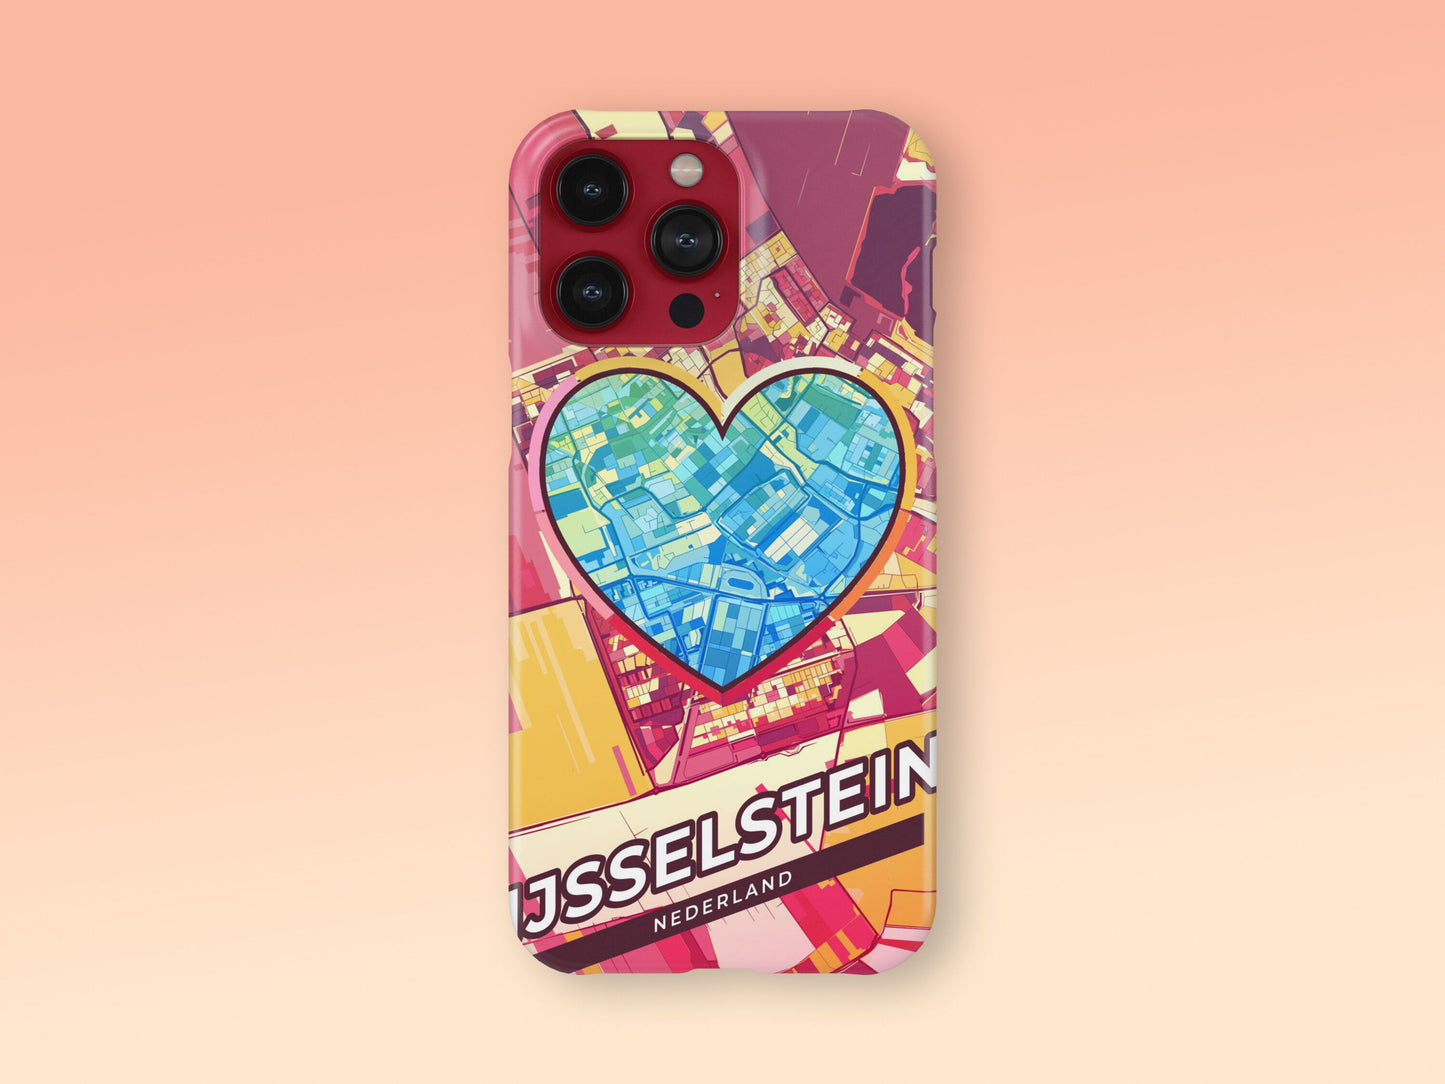 Ijsselstein Netherlands slim phone case with colorful icon. Birthday, wedding or housewarming gift. Couple match cases. 2